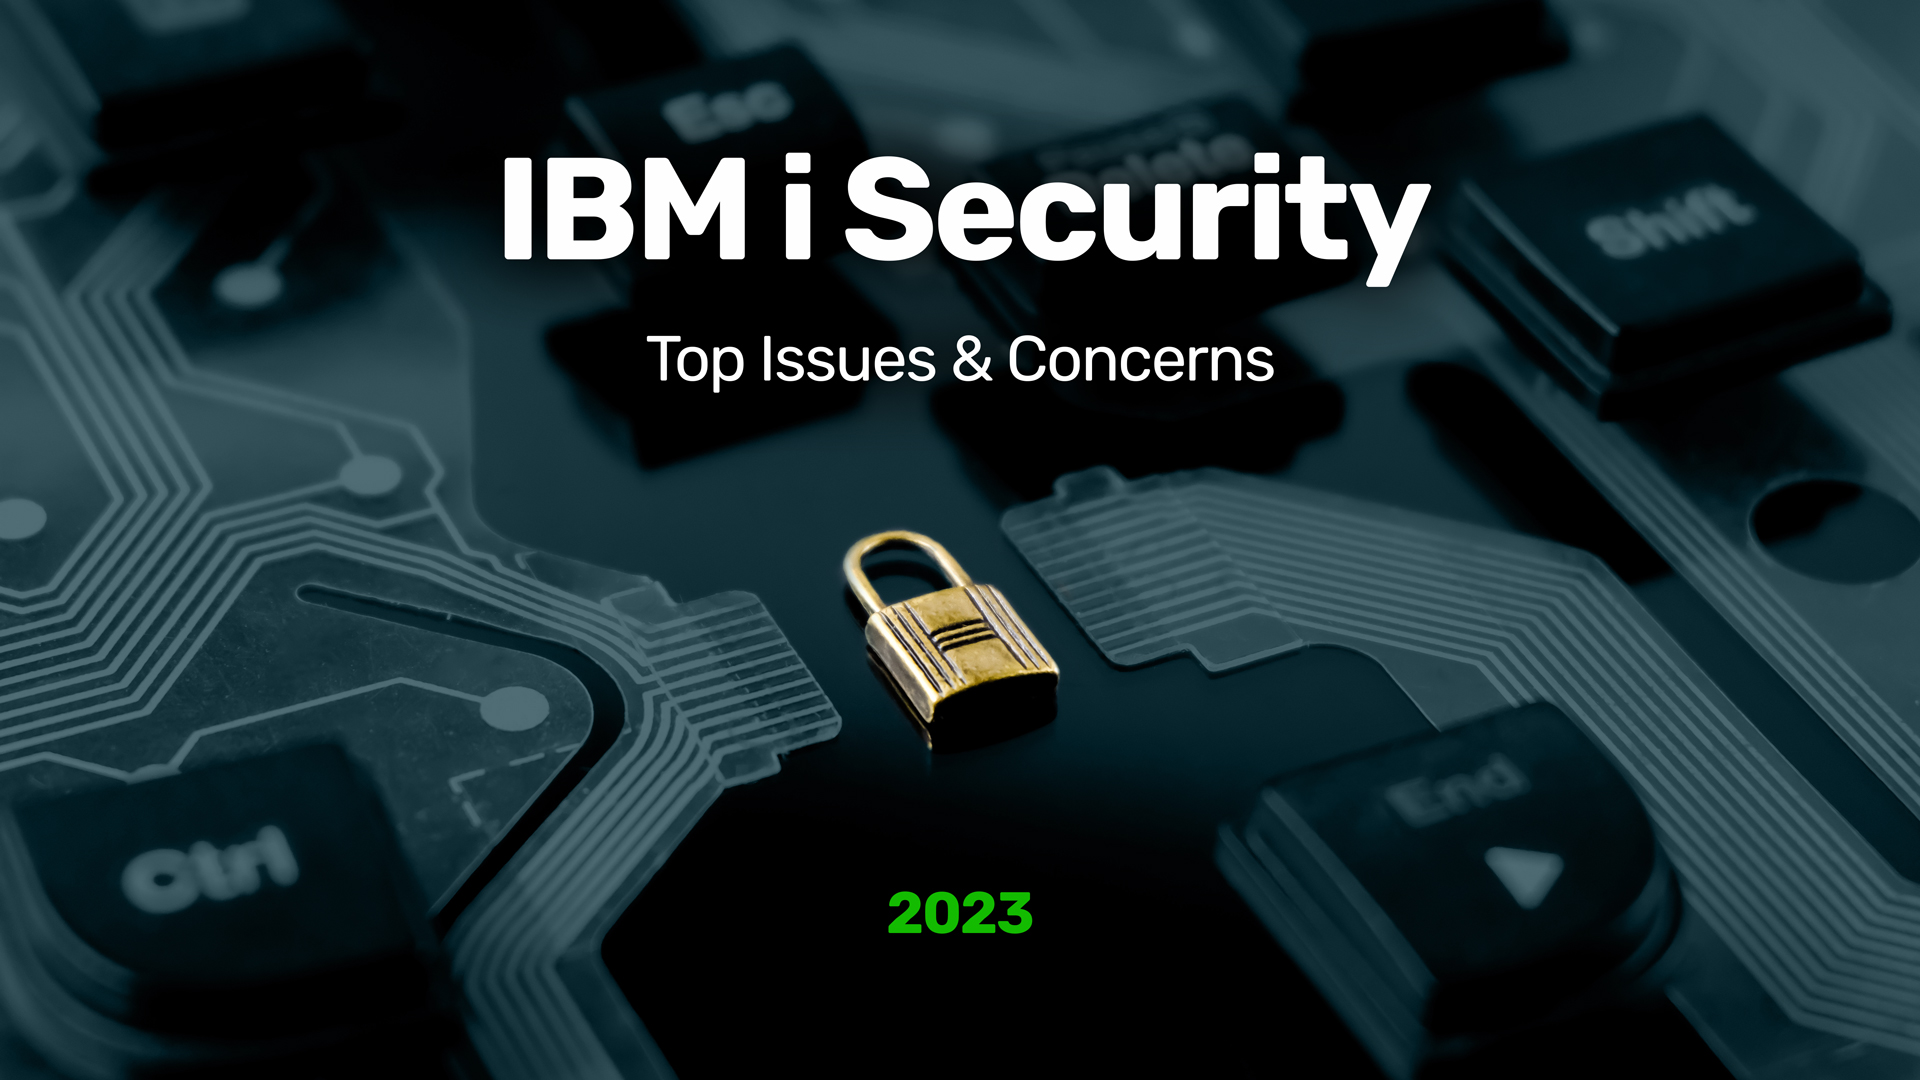 IBM i Security – The Top Issues and Concerns in 2023